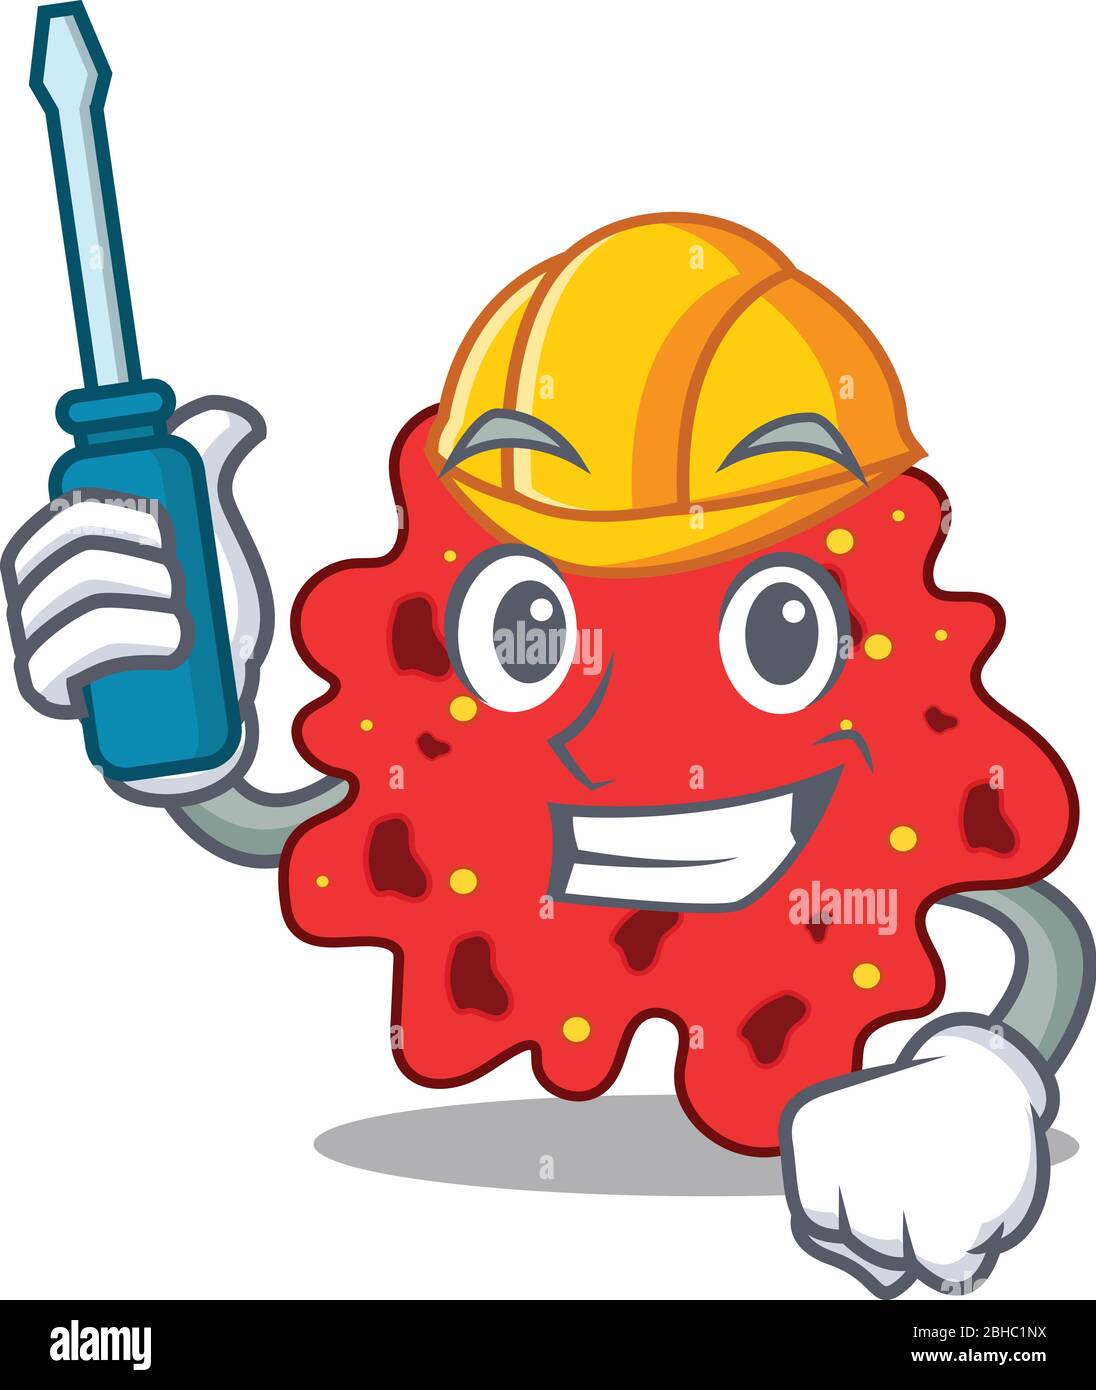 cartoon character of streptococcus pneumoniae worked as an automotive Stock Vector